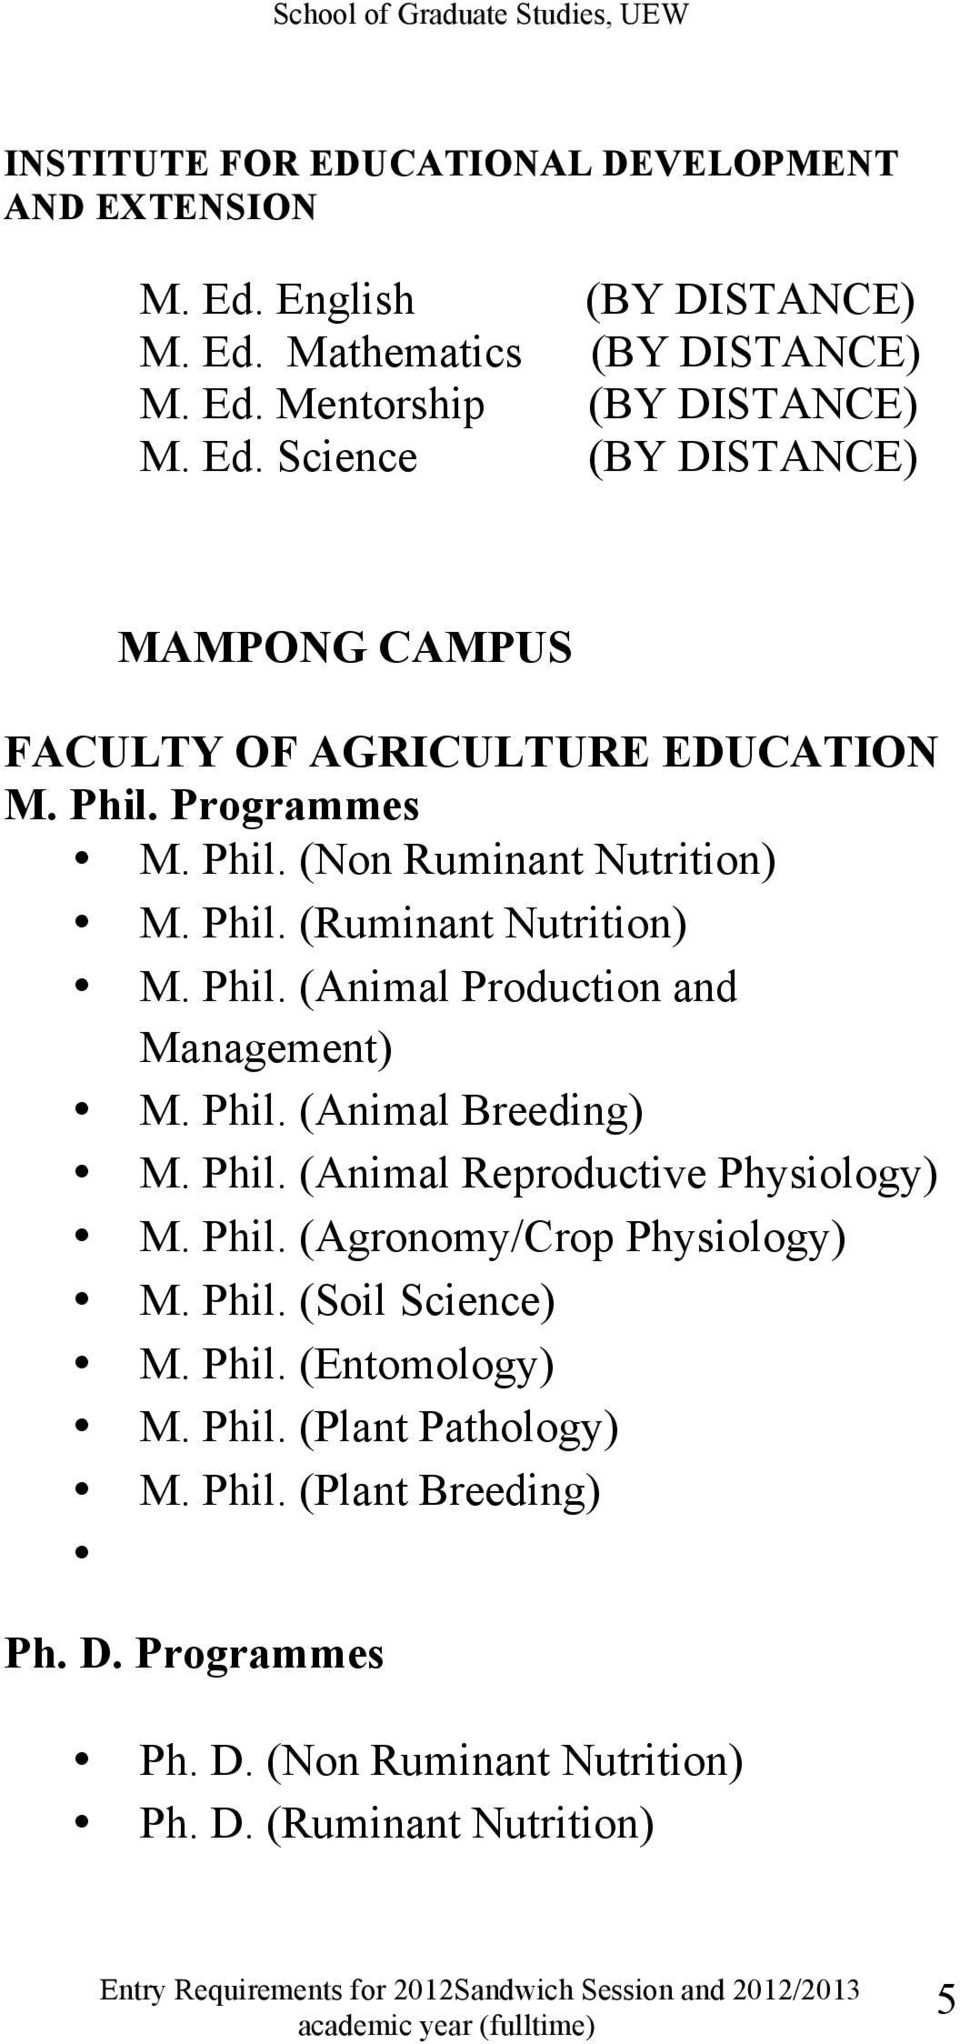 Phil. (Animal Reproductive Physiology) M. Phil. (Agronomy/Crop Physiology) M. Phil. (Soil Science) M. Phil. (Entomology) M. Phil. (Plant Pathology) M. Phil. (Plant Breeding) Ph.